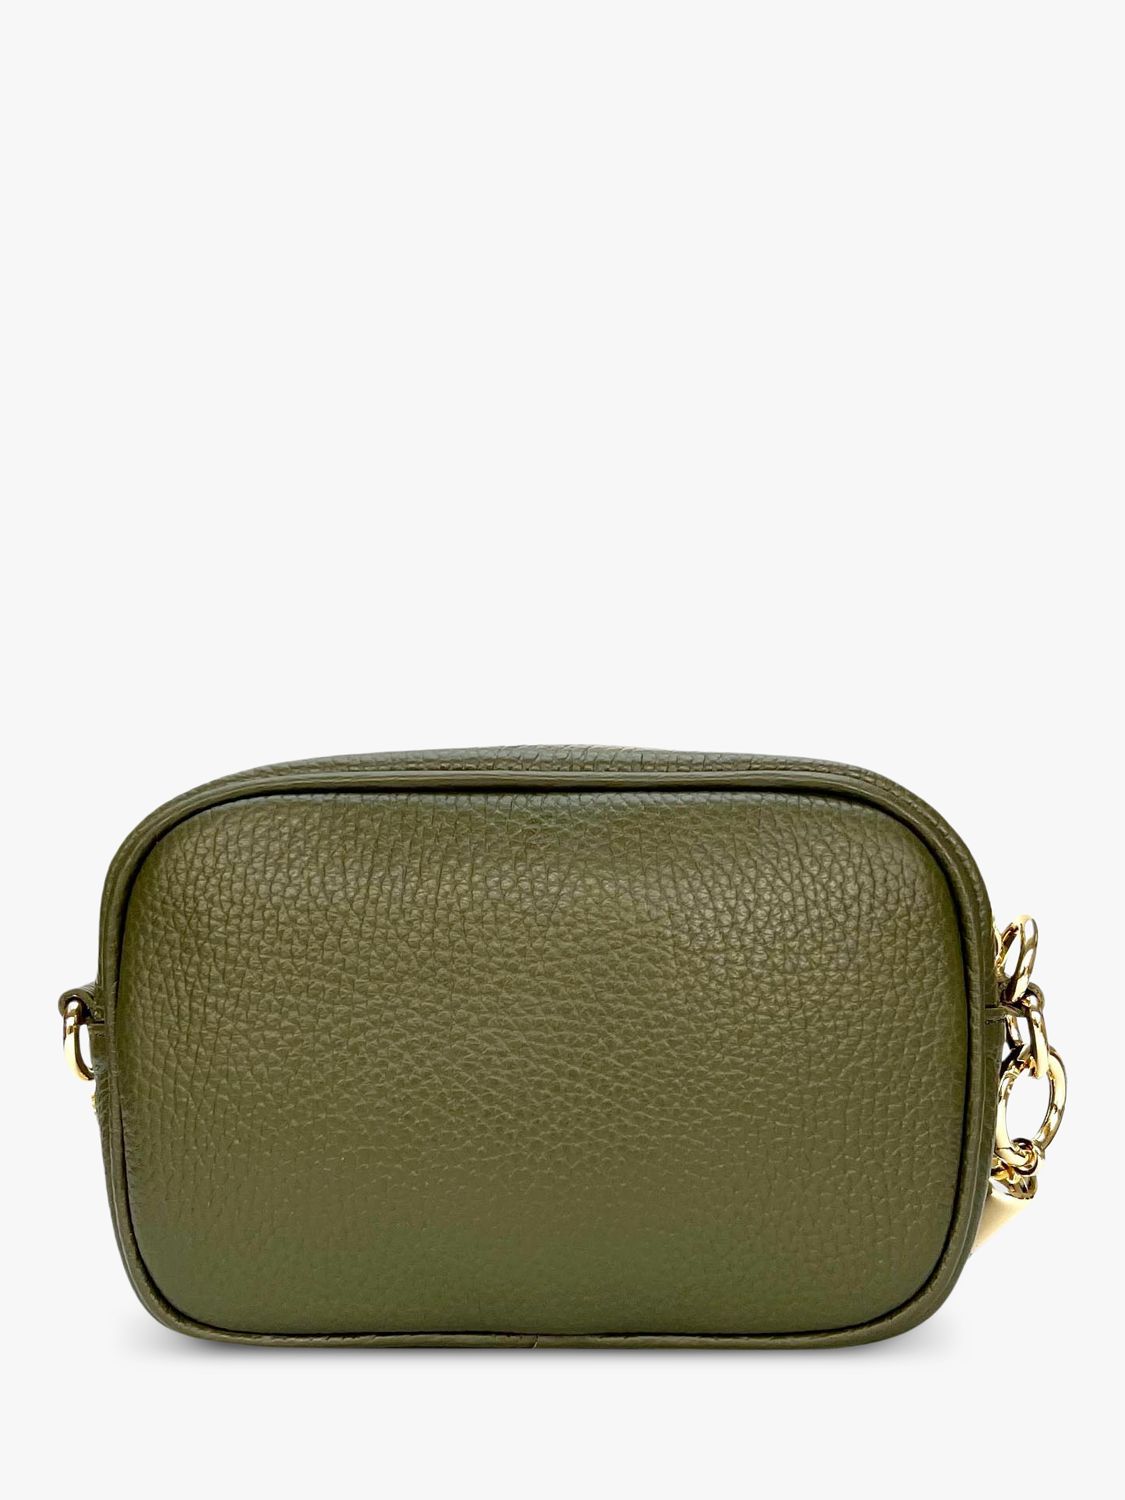 Apatchy The Mini Tassel Leather Crossbody Phone Bag, Olive Green